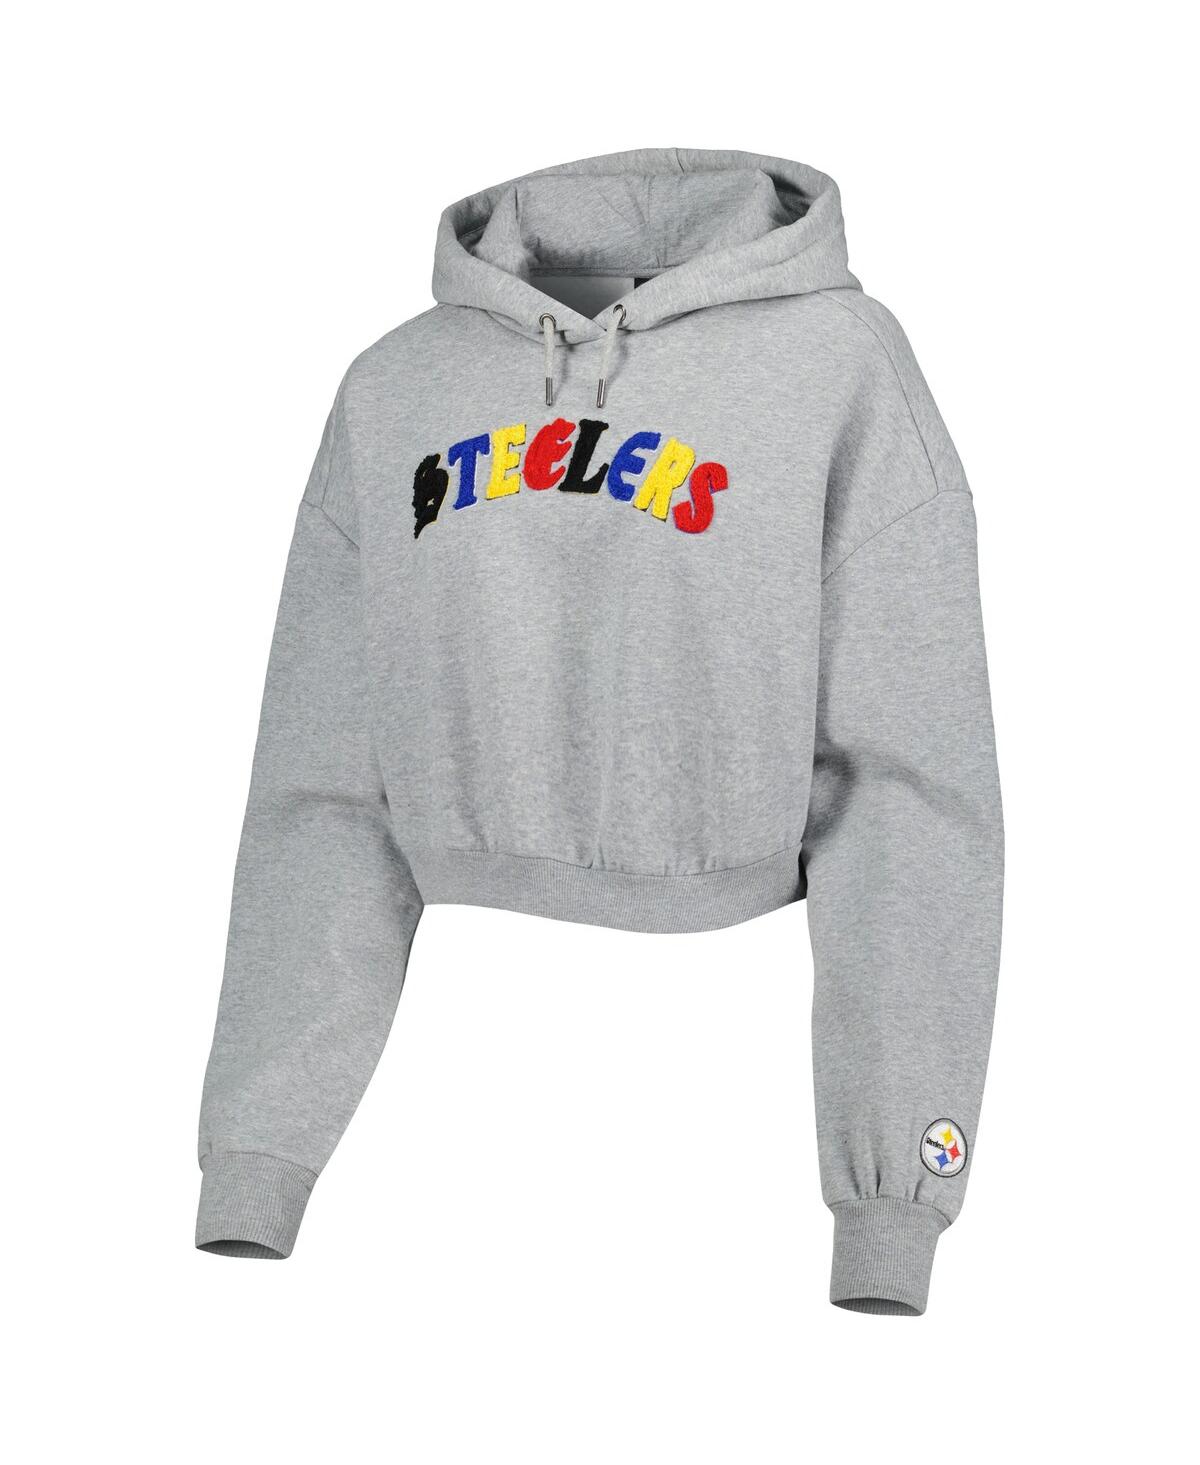 Shop The Wild Collective Women's  Gray Pittsburgh Steelers Cropped Pullover Hoodie